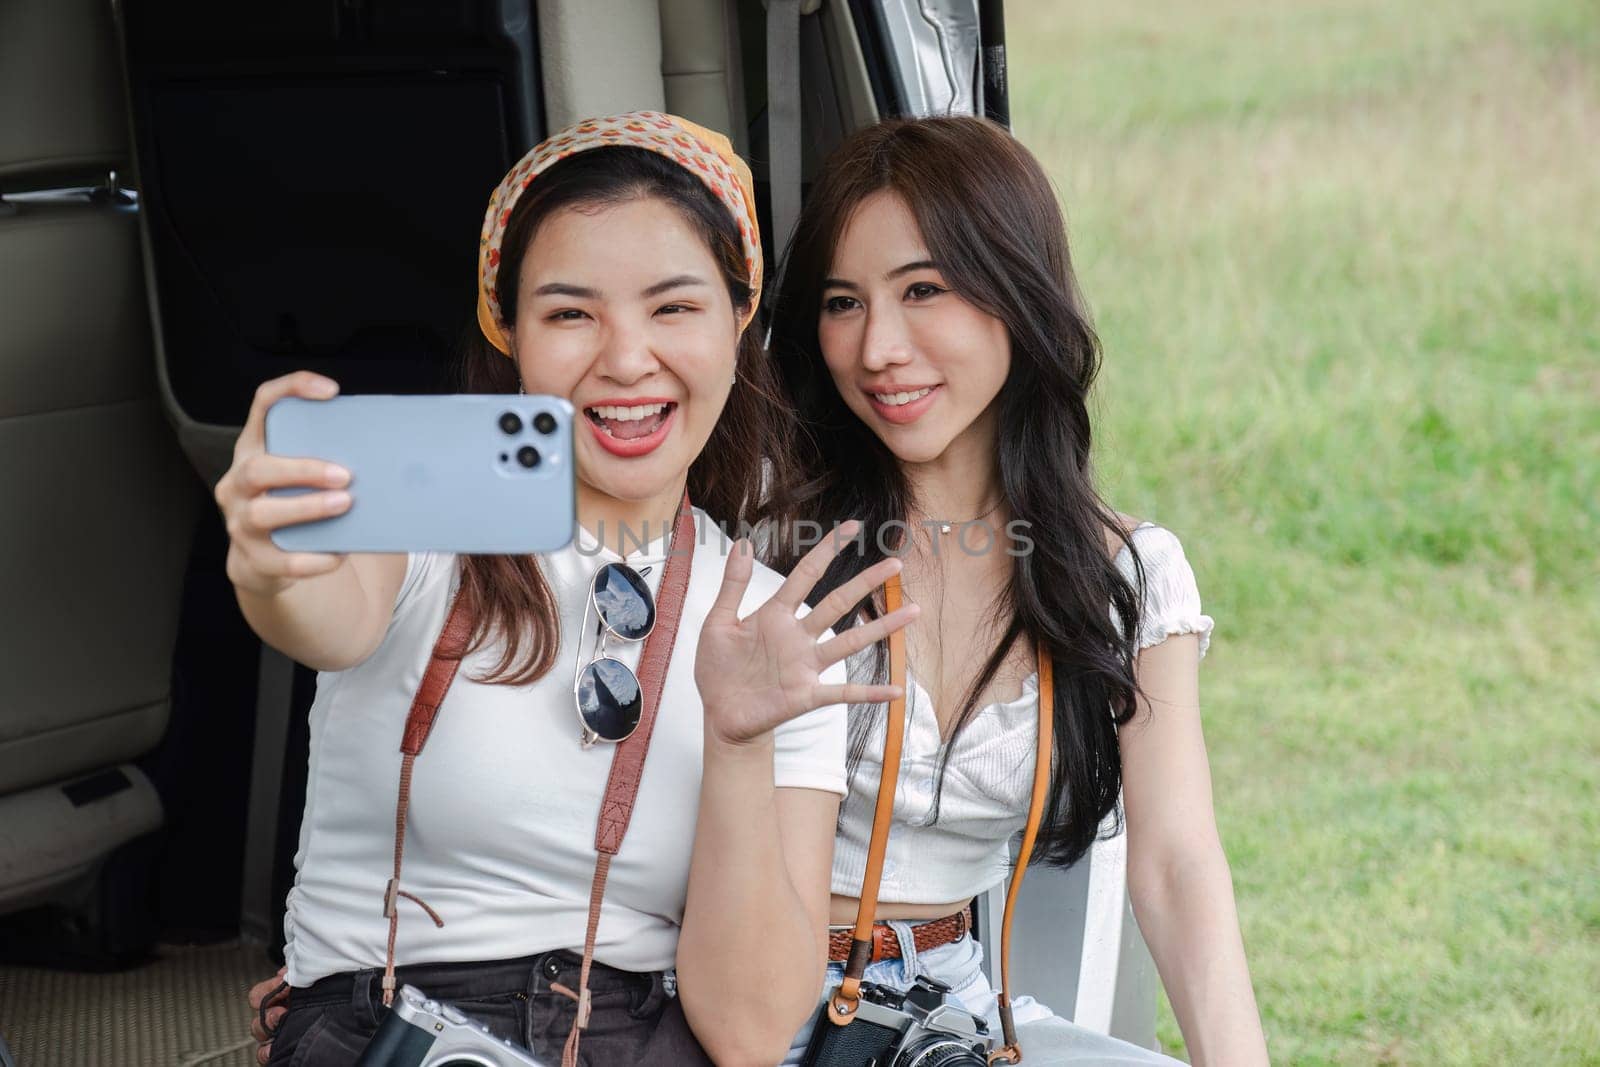 Two young women in white T-shirts and jeans sit back and relax, taking selfies together with their cell phones in the back of a car..